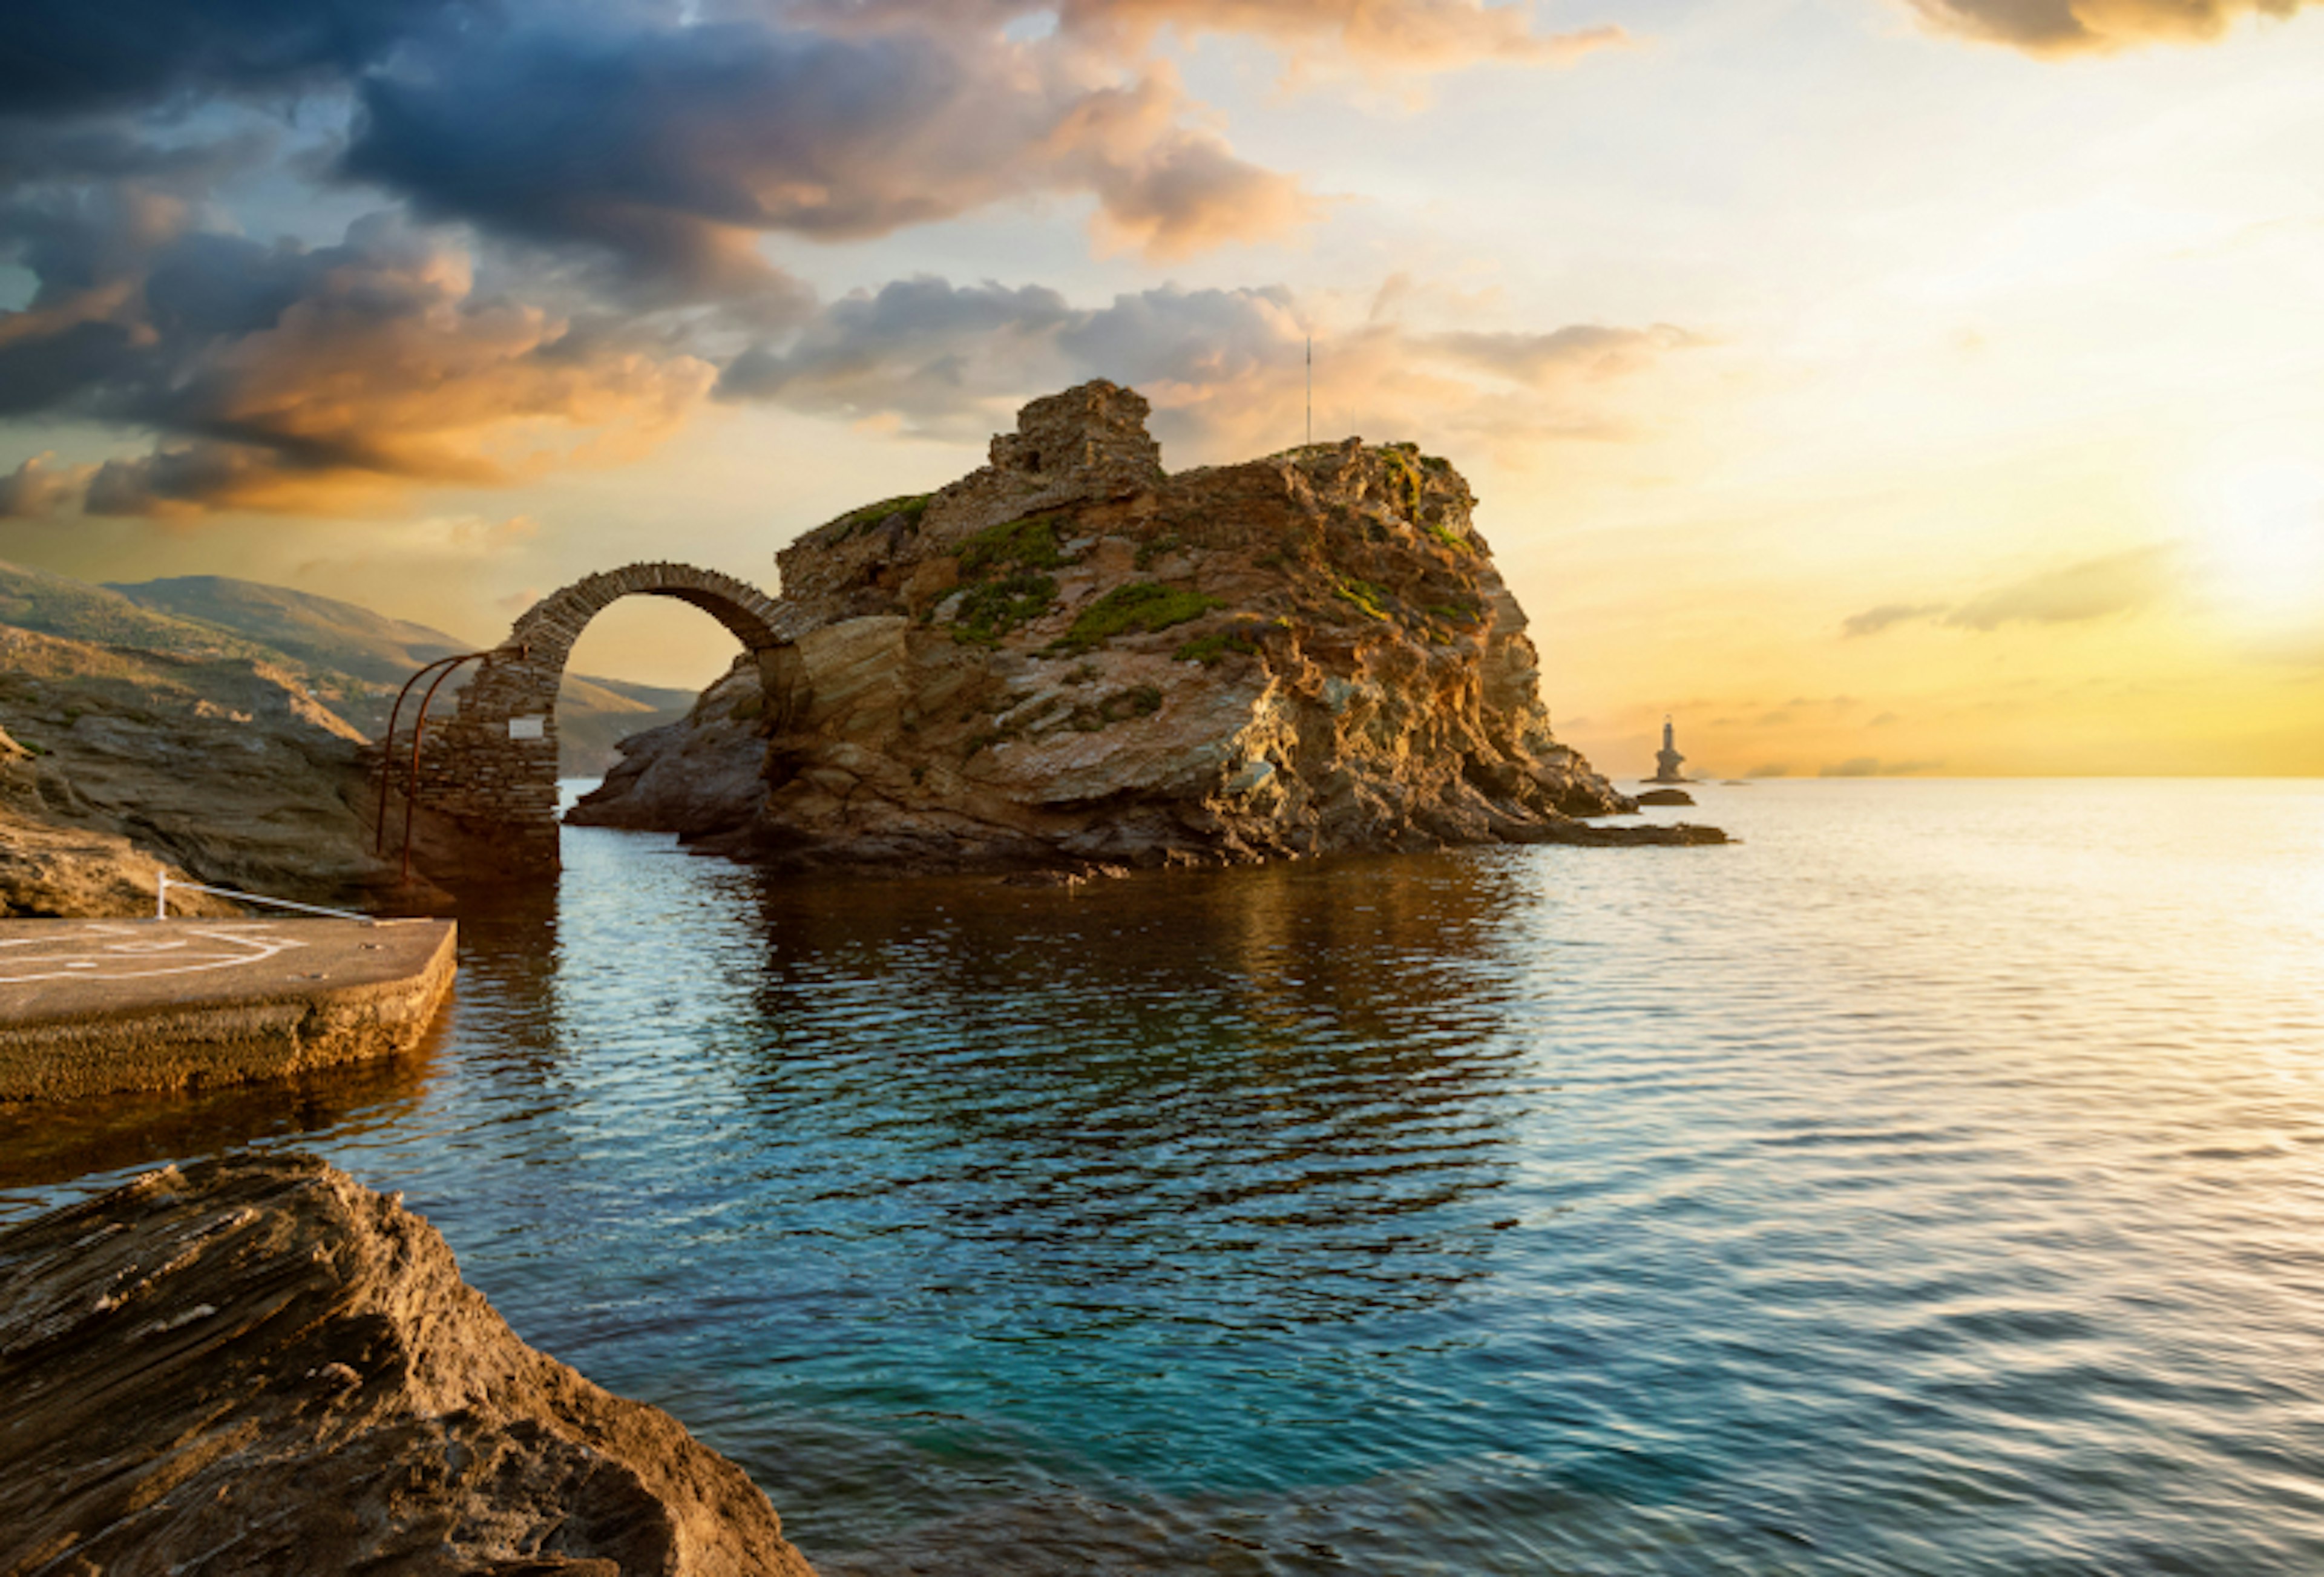 The old arched stone bridge leading to the ancient Castle of Andros island at the Cyclades of Greece during a beautiful summer sunrise